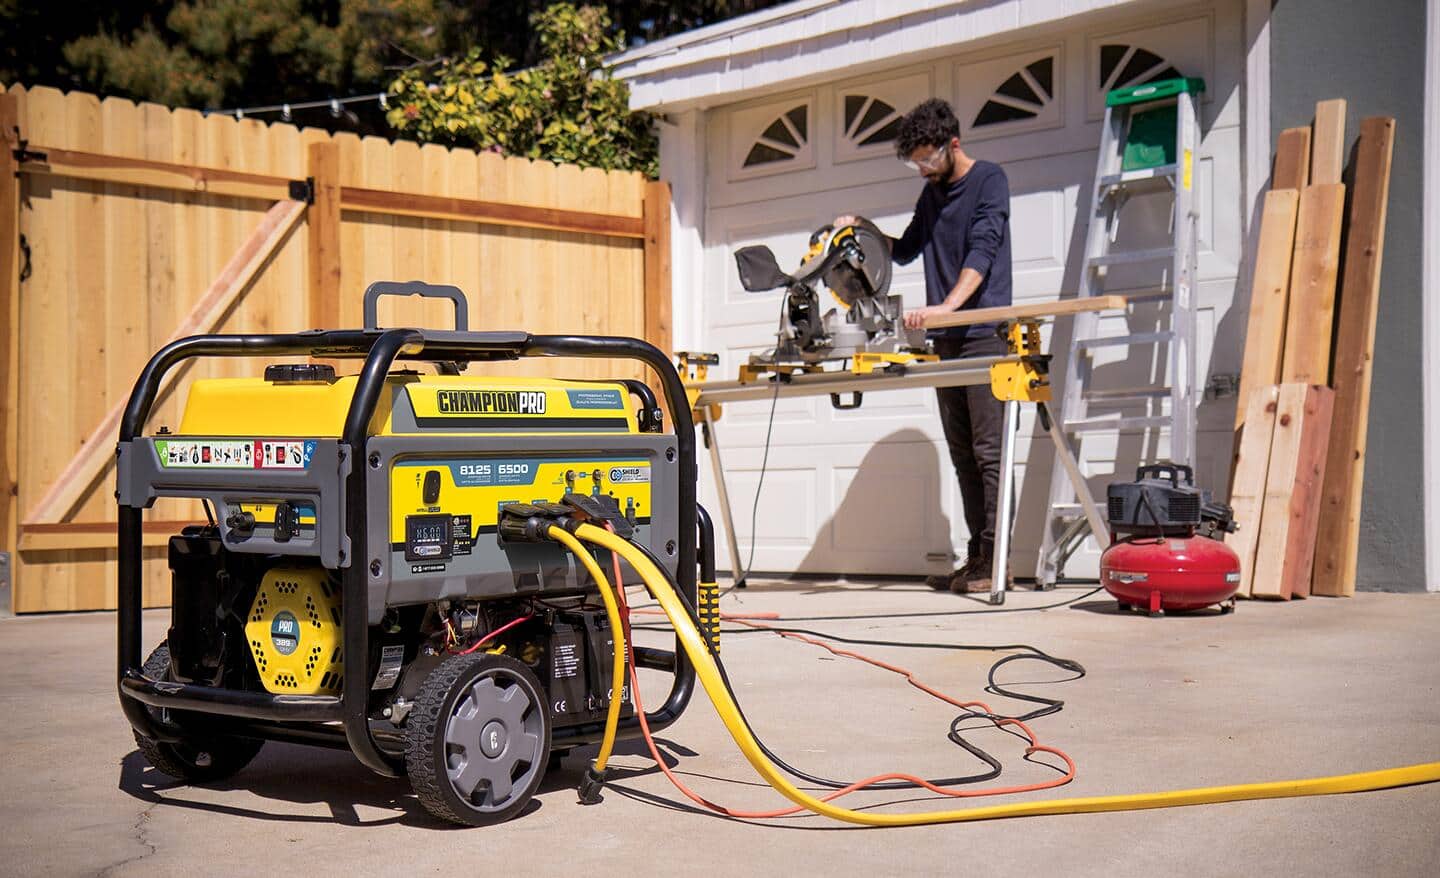 A man use a portable generator to power a saw in front of a garage door.